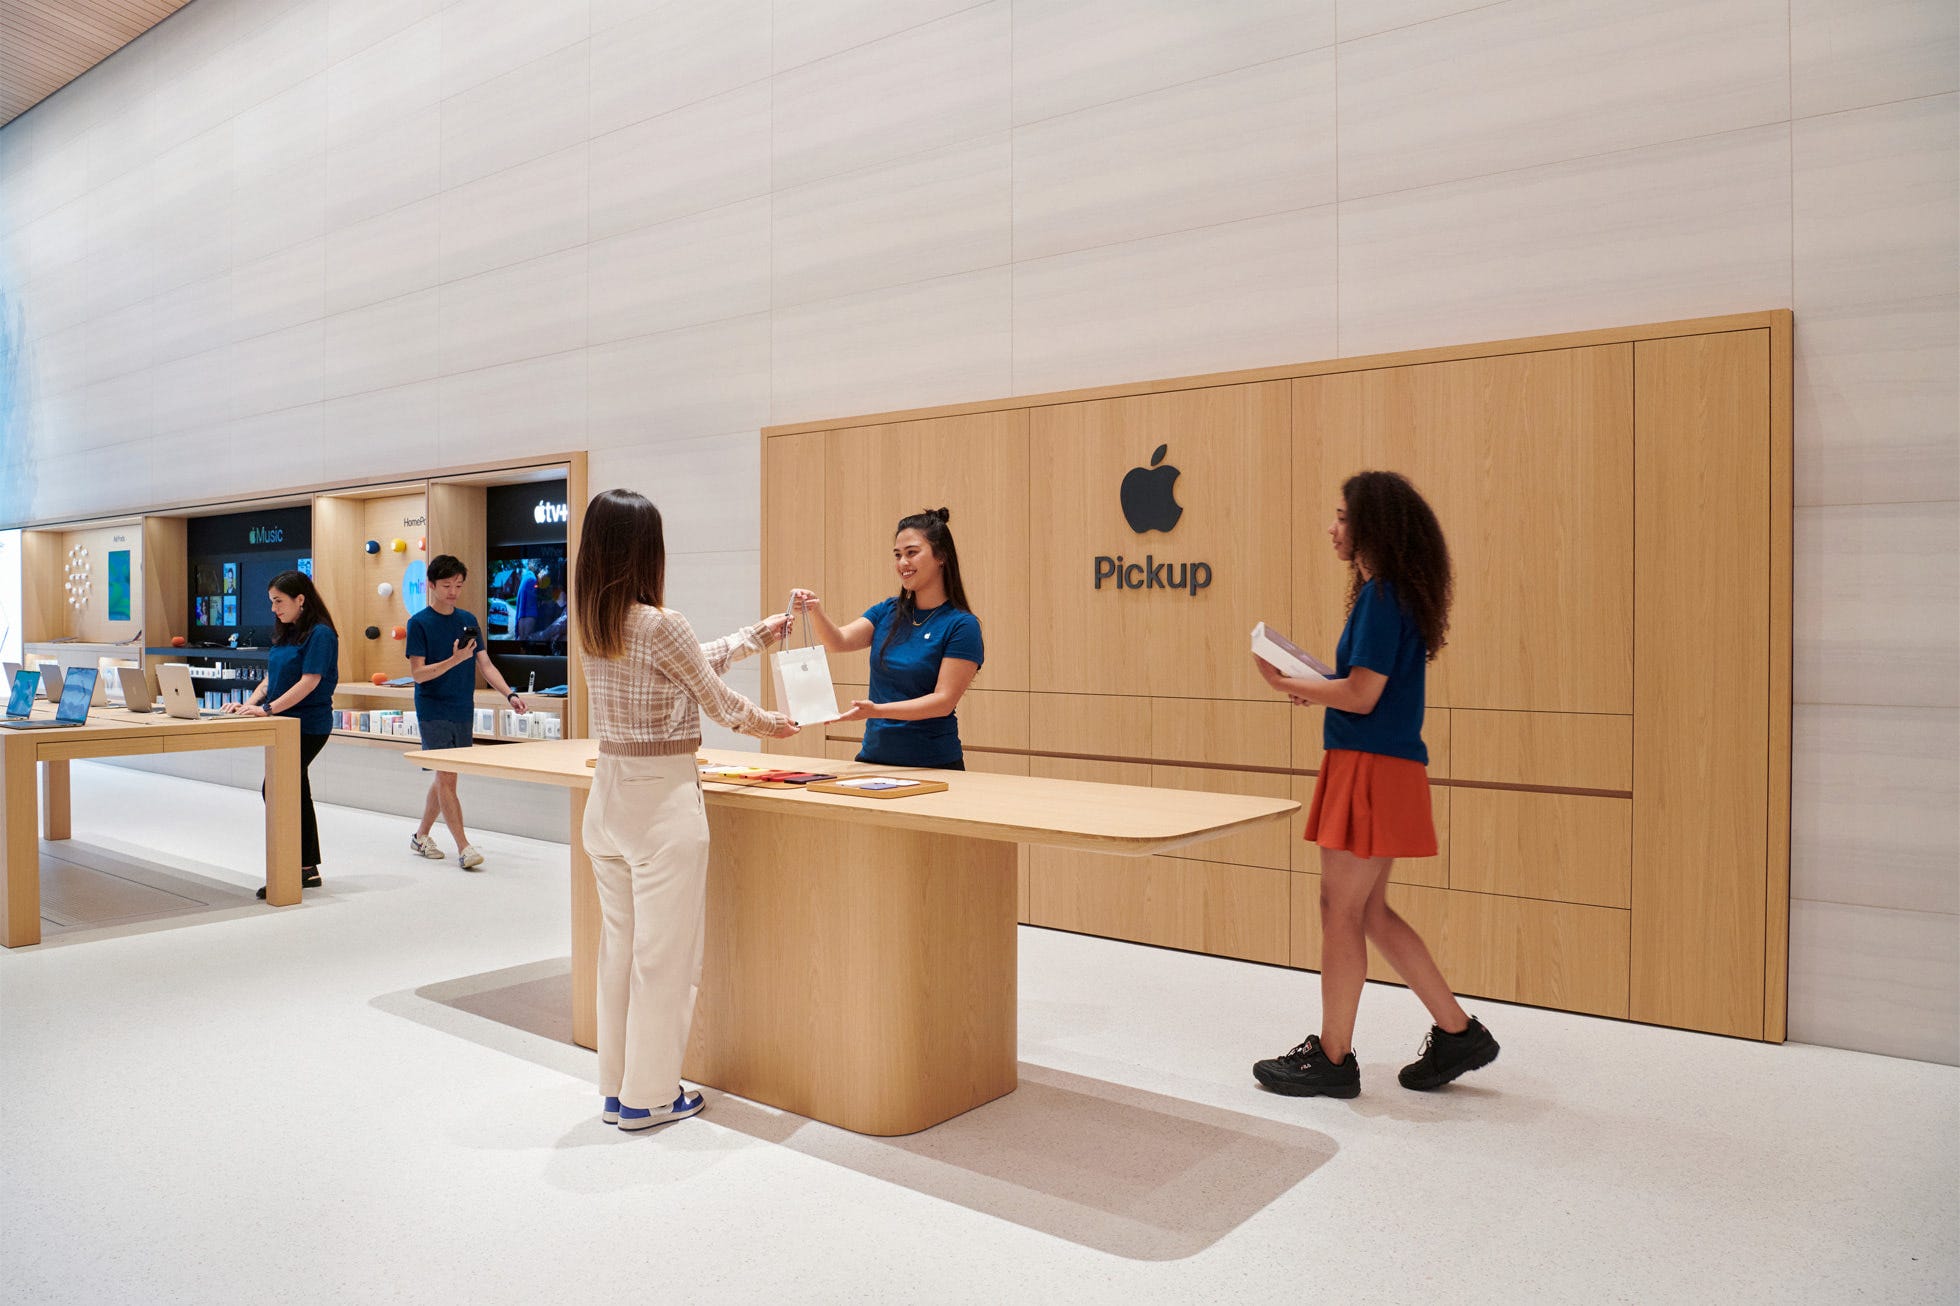 Check Out Every Apple Store Ever Opened, in Order